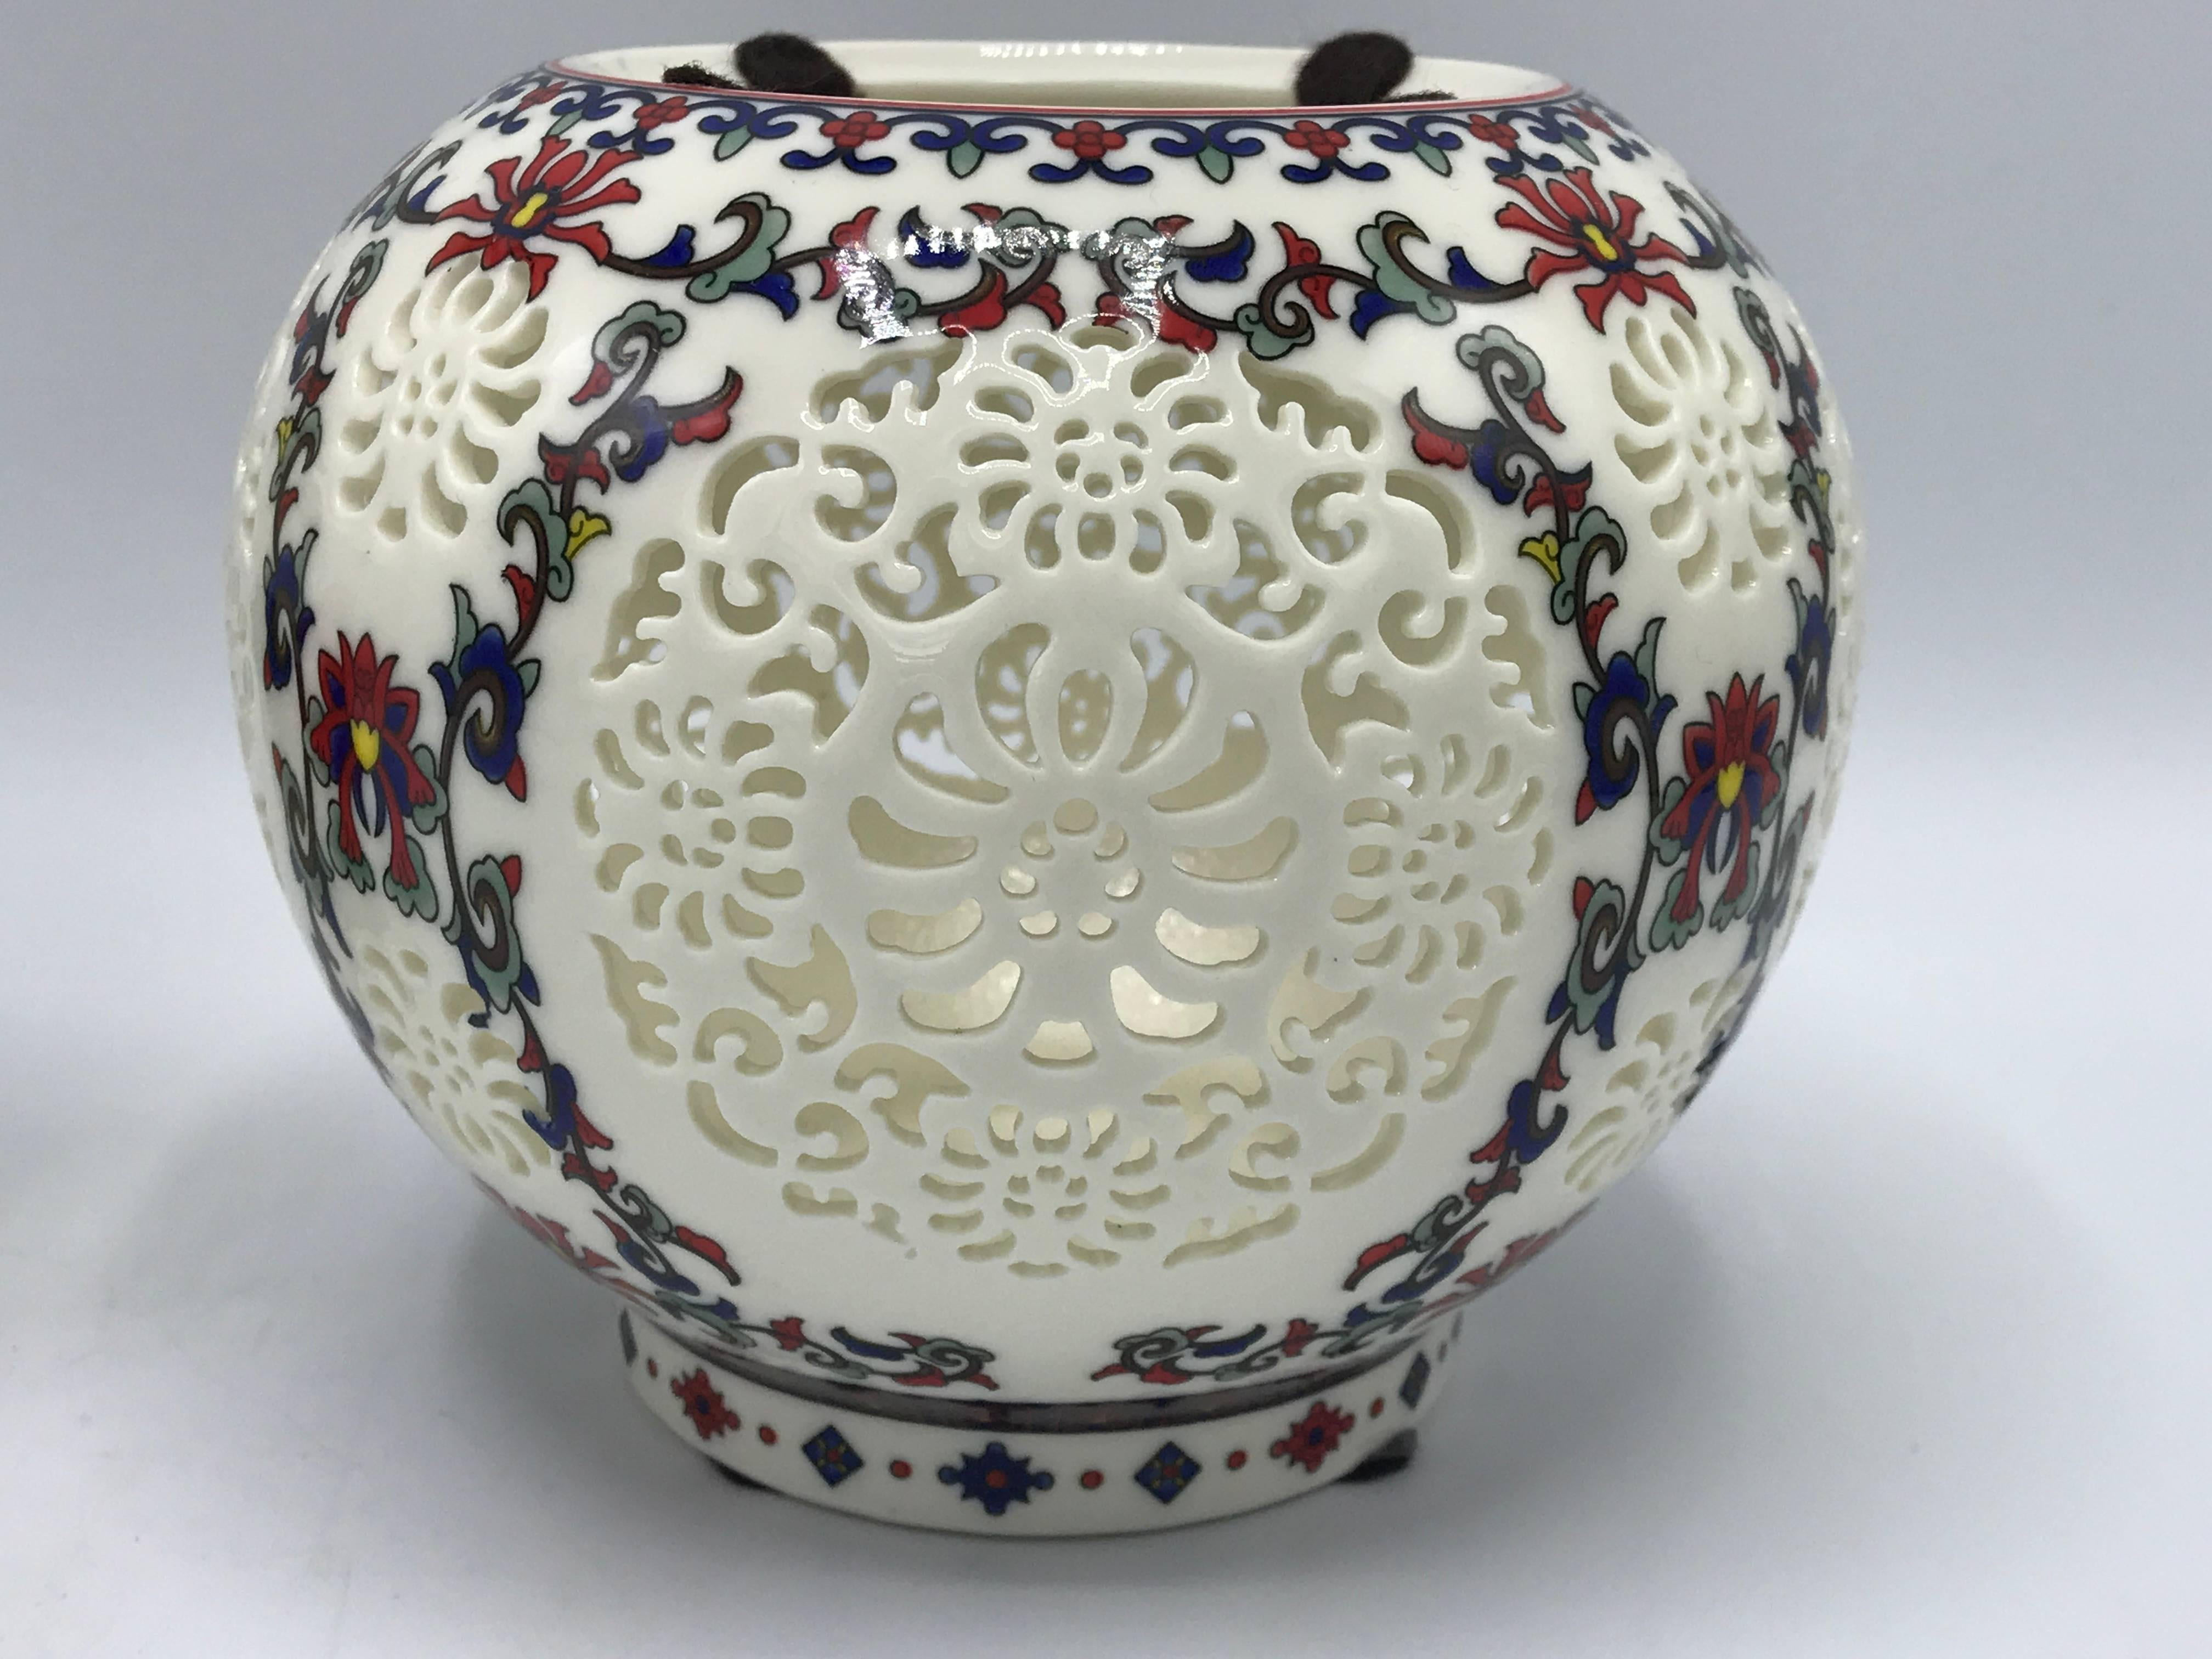 1960s Blanc de Chine Pierced Vase with Floral Motif In Excellent Condition For Sale In Richmond, VA